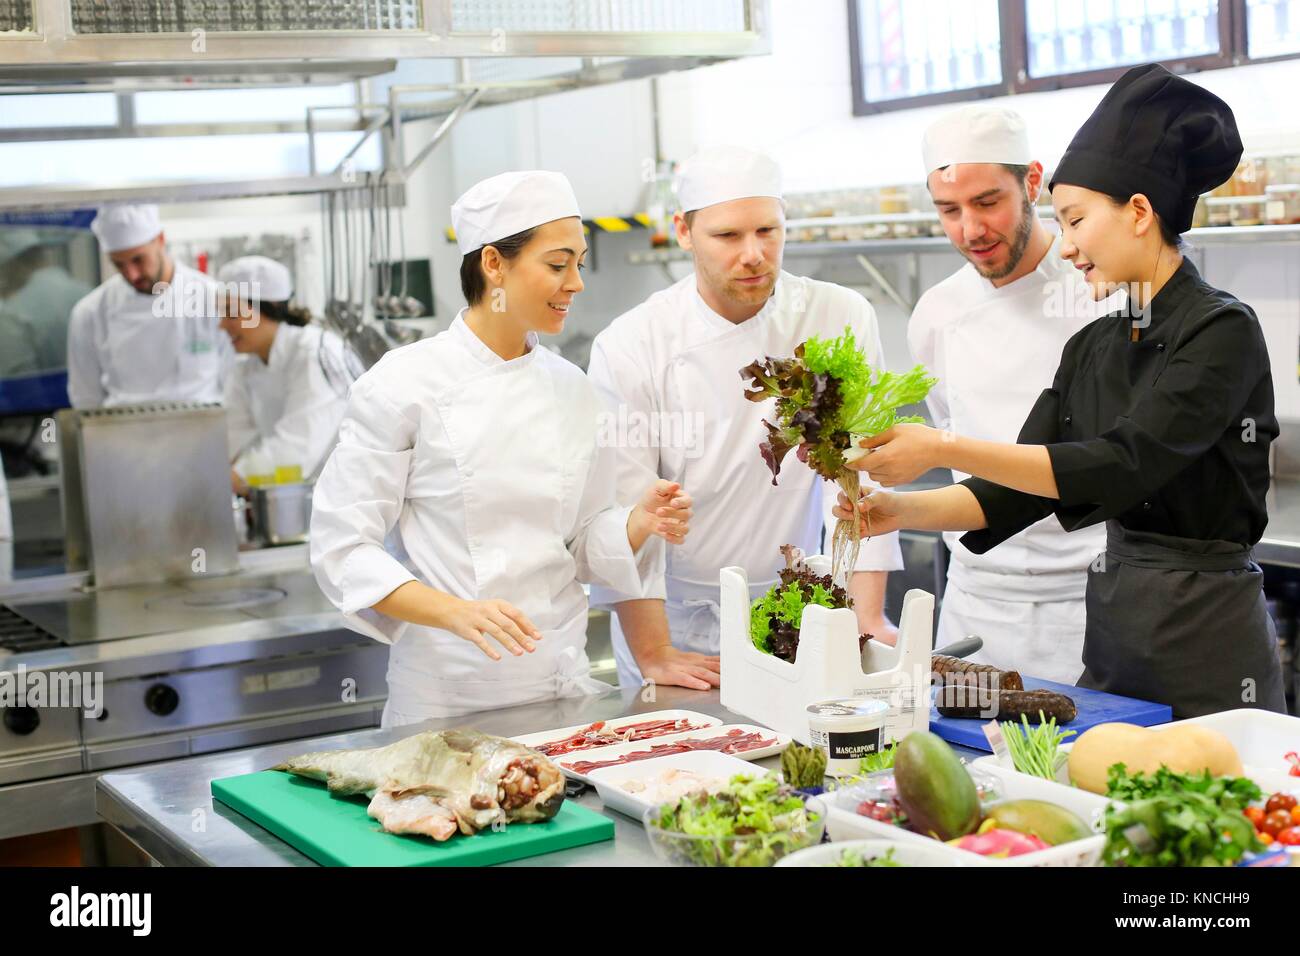 4 Chefs High Resolution Stock Photography and Images - Alamy